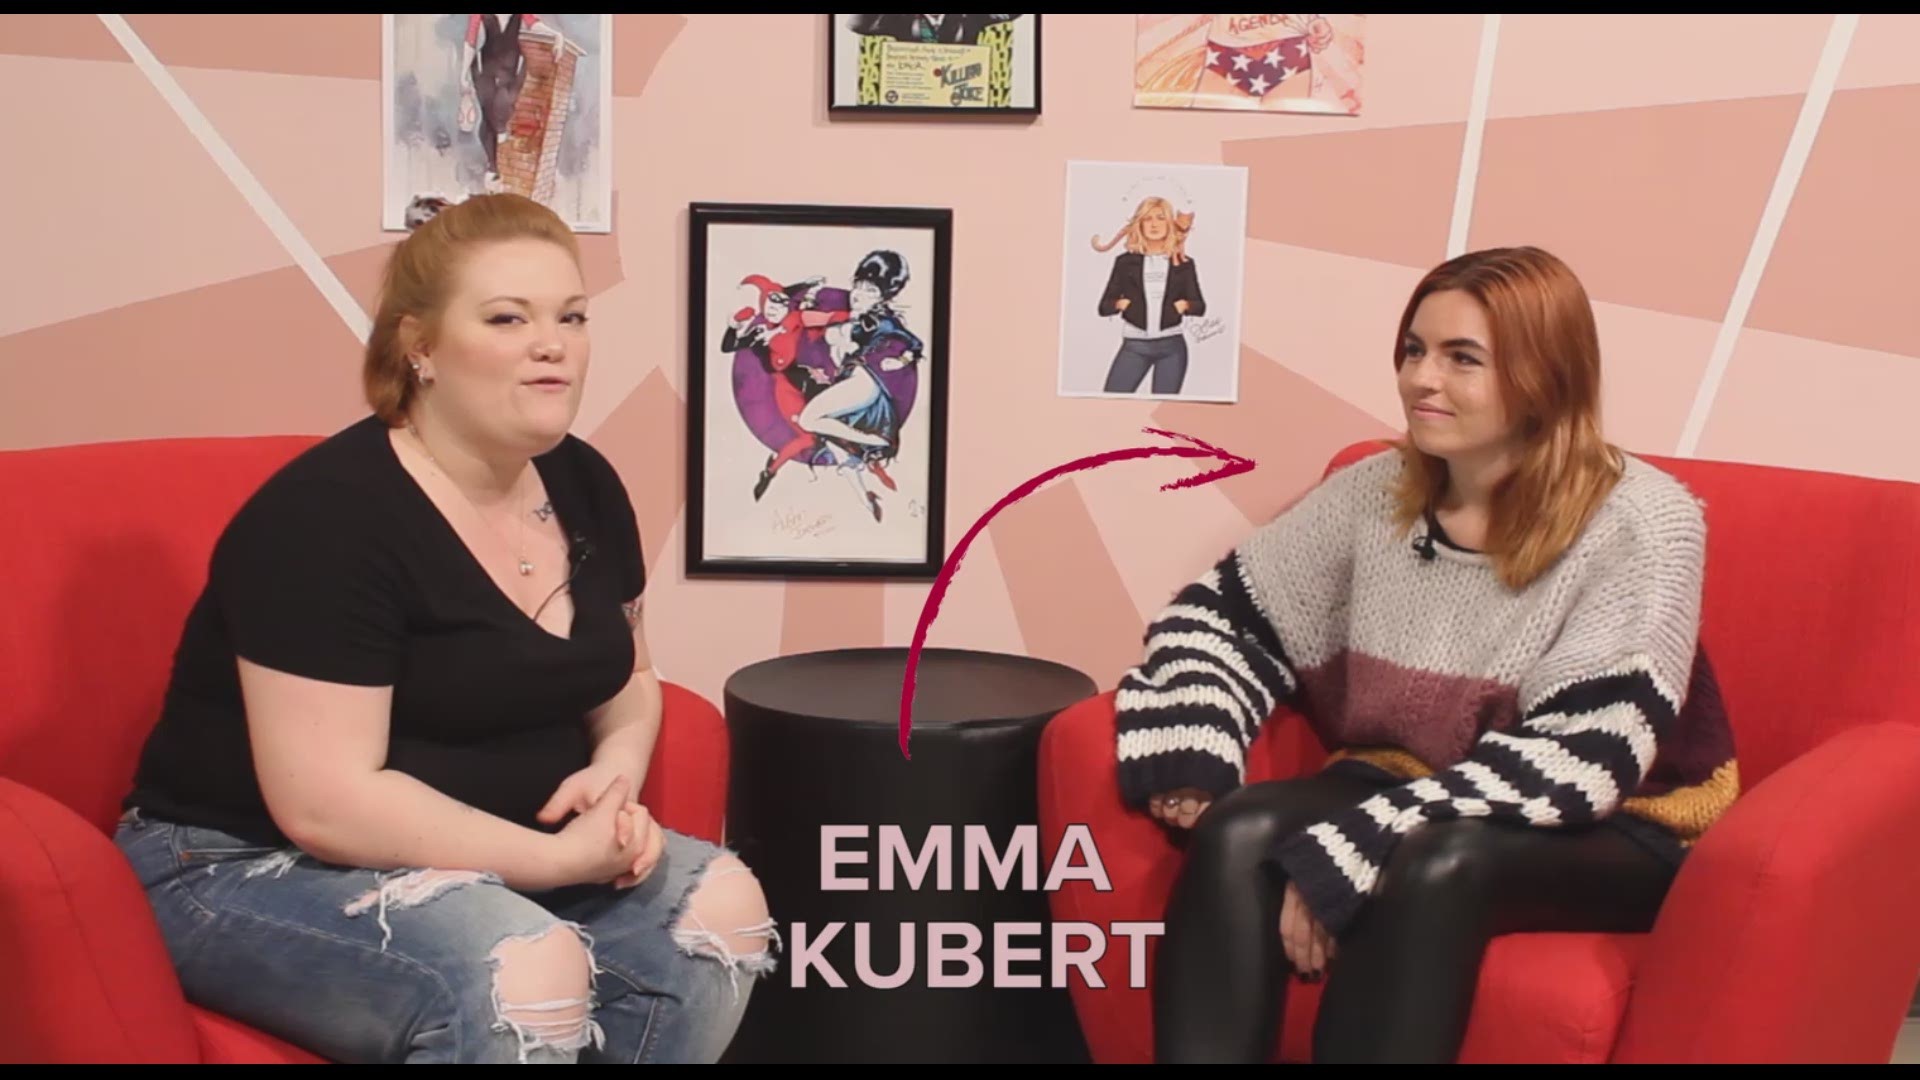 Emma Kubert comes from a long line of artists but she is paving her own way.